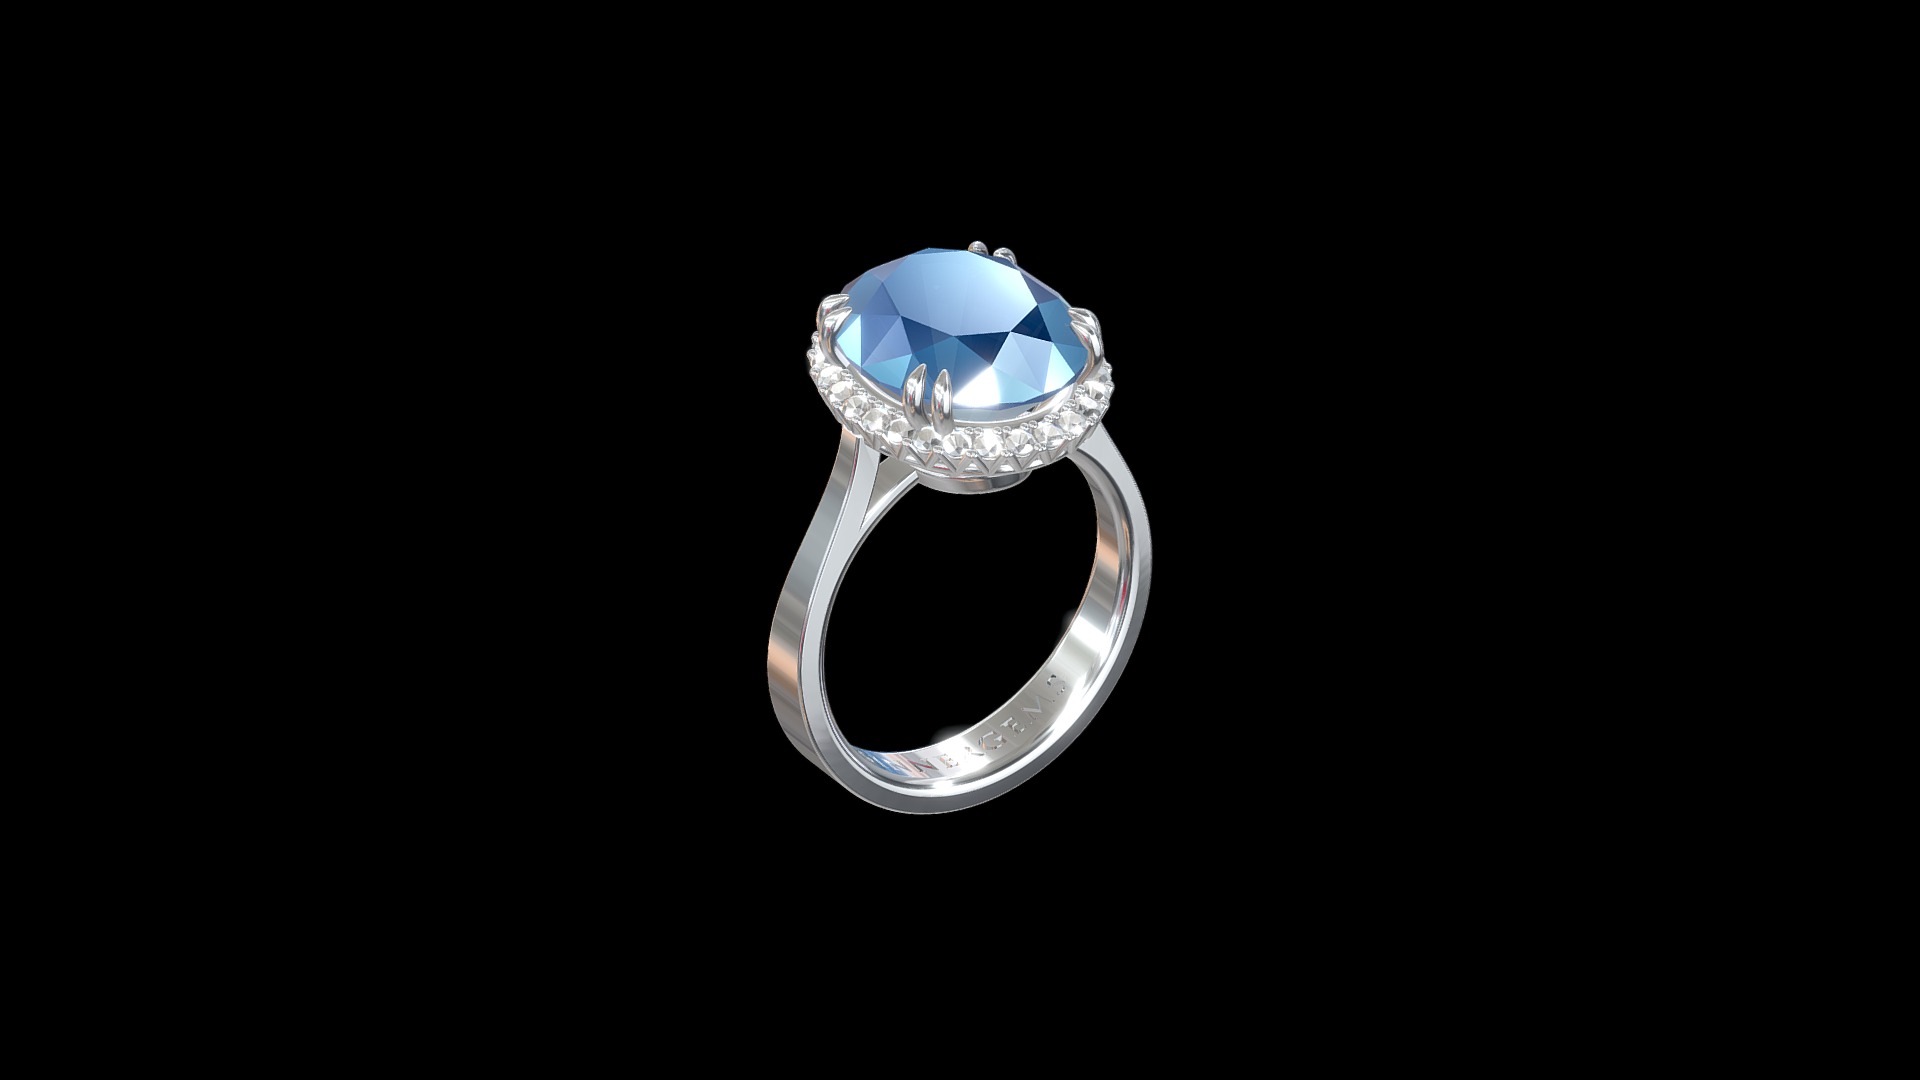 3D model SGO377 - This is a 3D model of the SGO377. The 3D model is about a ring with a blue gem.